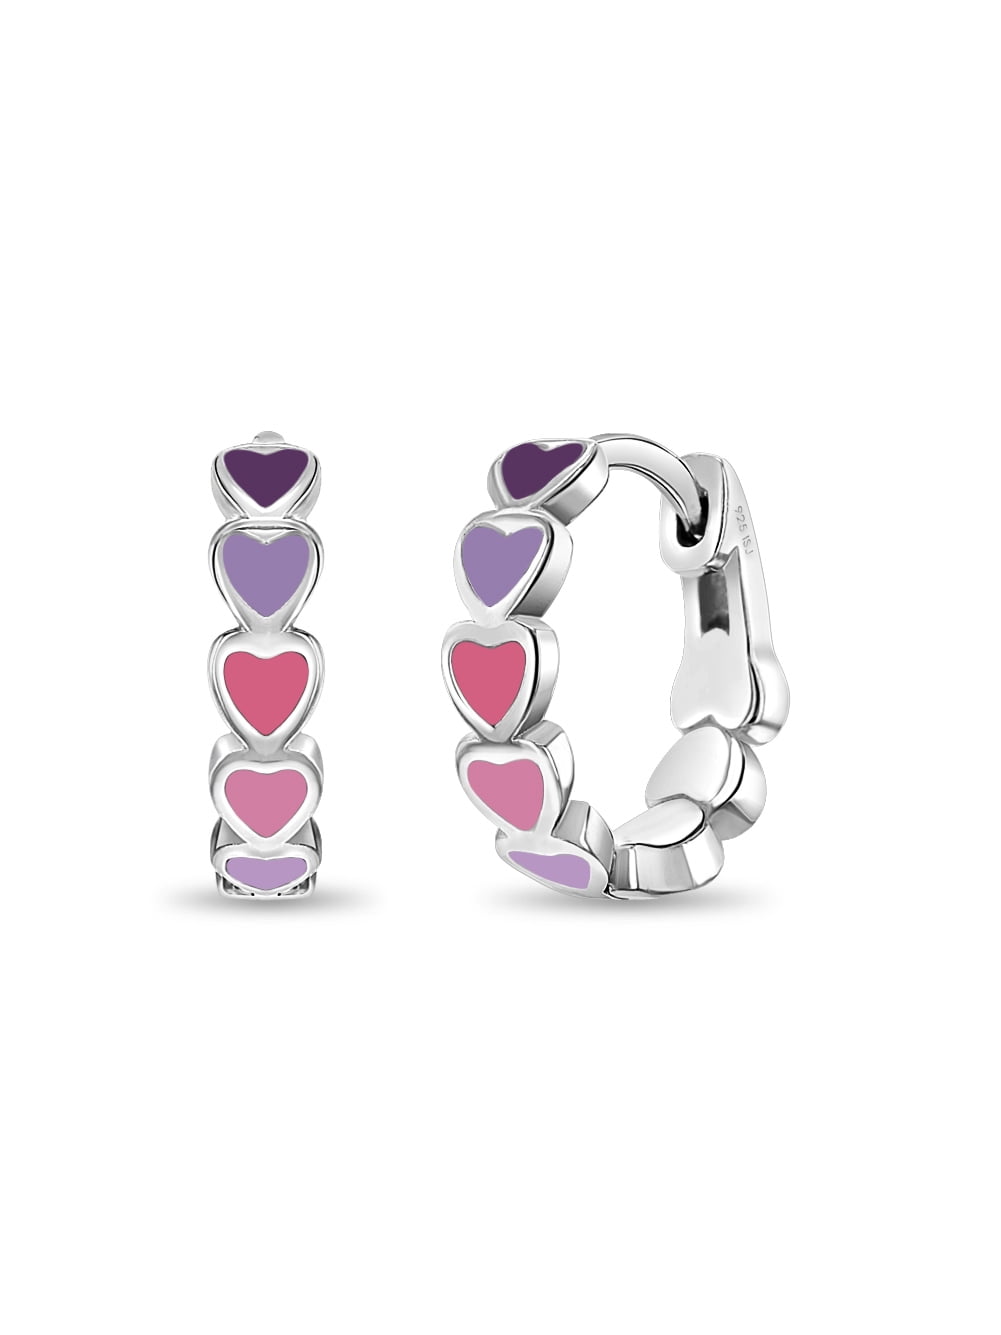 Buy SH01Z Sterling Silver Jewelry Children's 10mm Small Size Huggie Hoop  Earrings and Heart Designed for Kids Online in India - Etsy